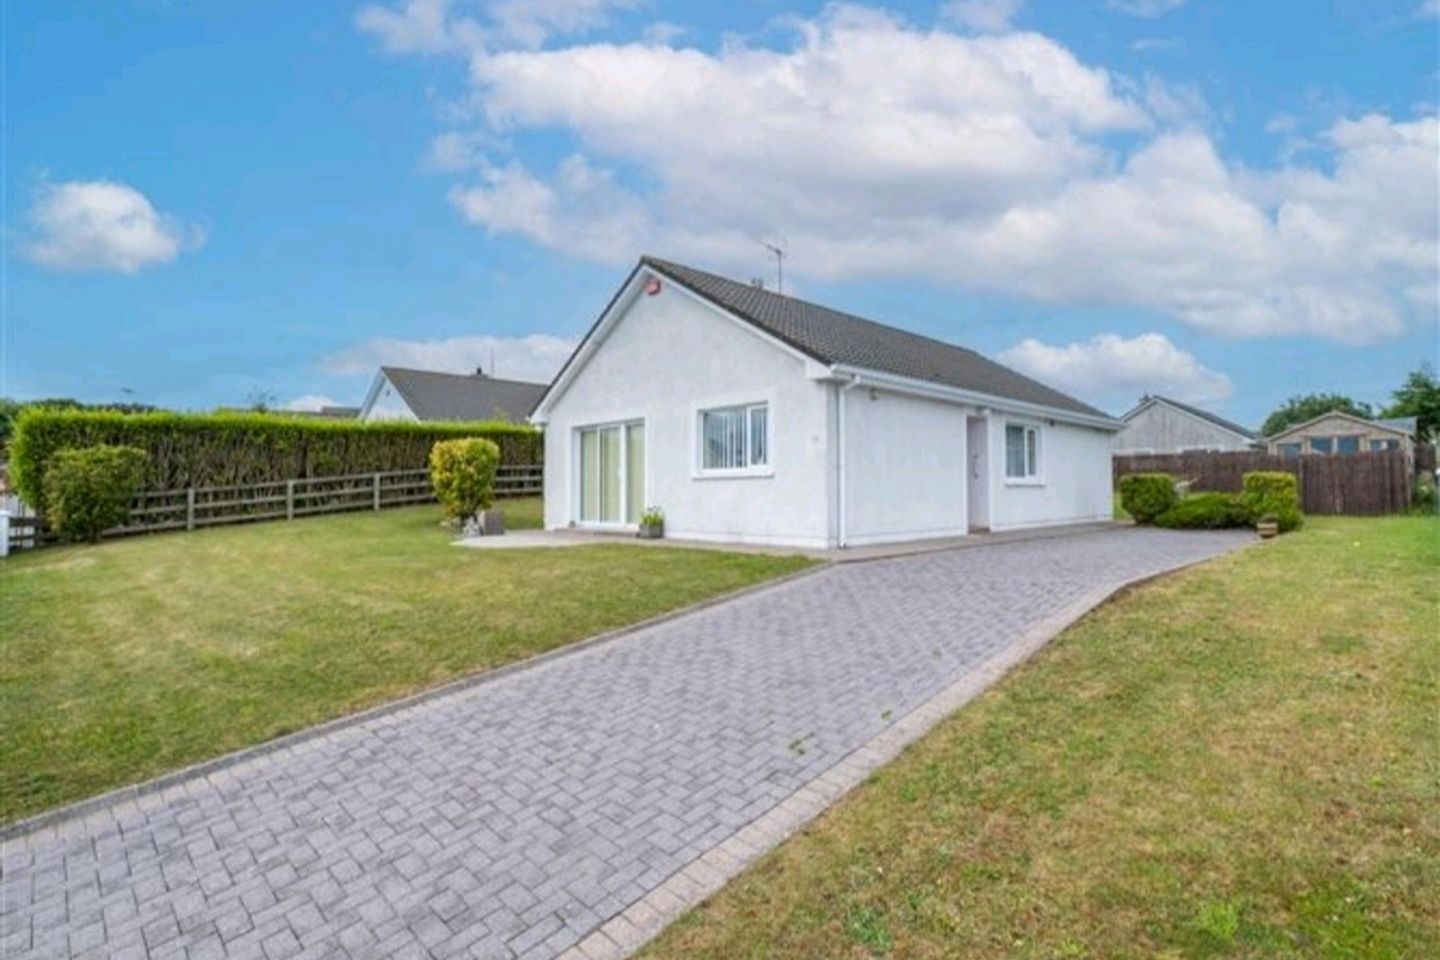 50 Summerdale Lawn, Youghal, Co. Cork